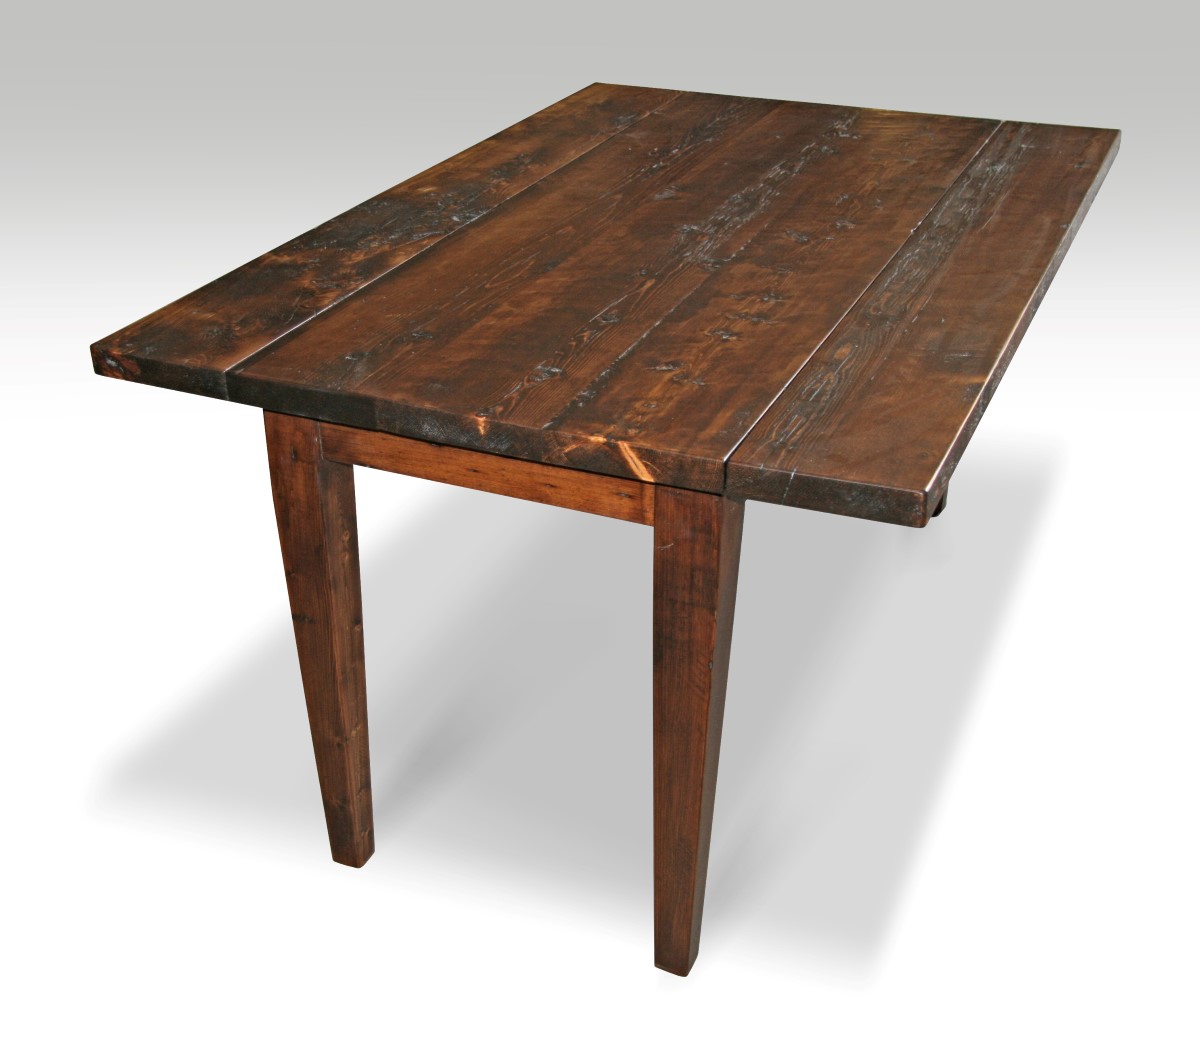 Reclaimed Wood Tables 